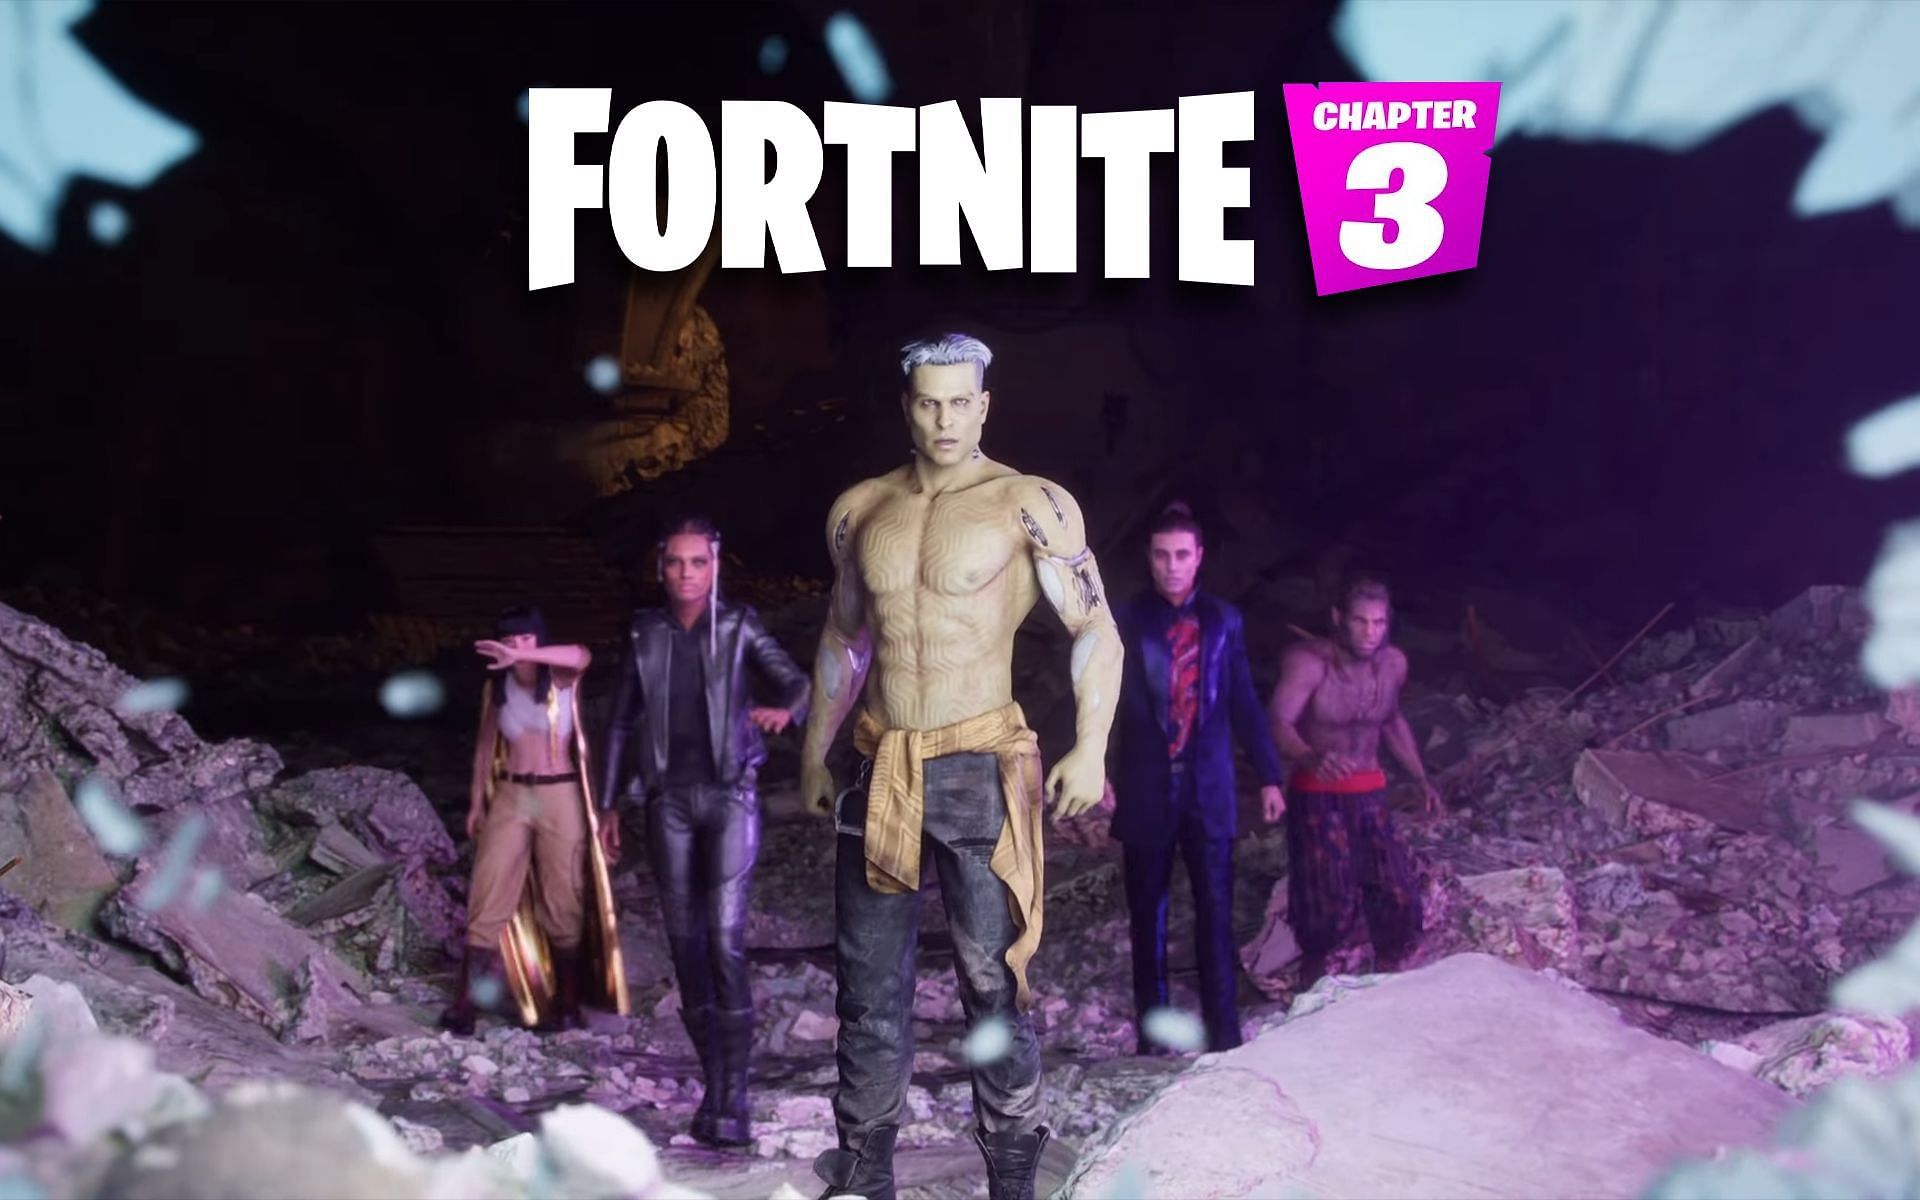 More monsters are set arrive soon in Fortnite Chapter 3 (Image via Universal Pictures)